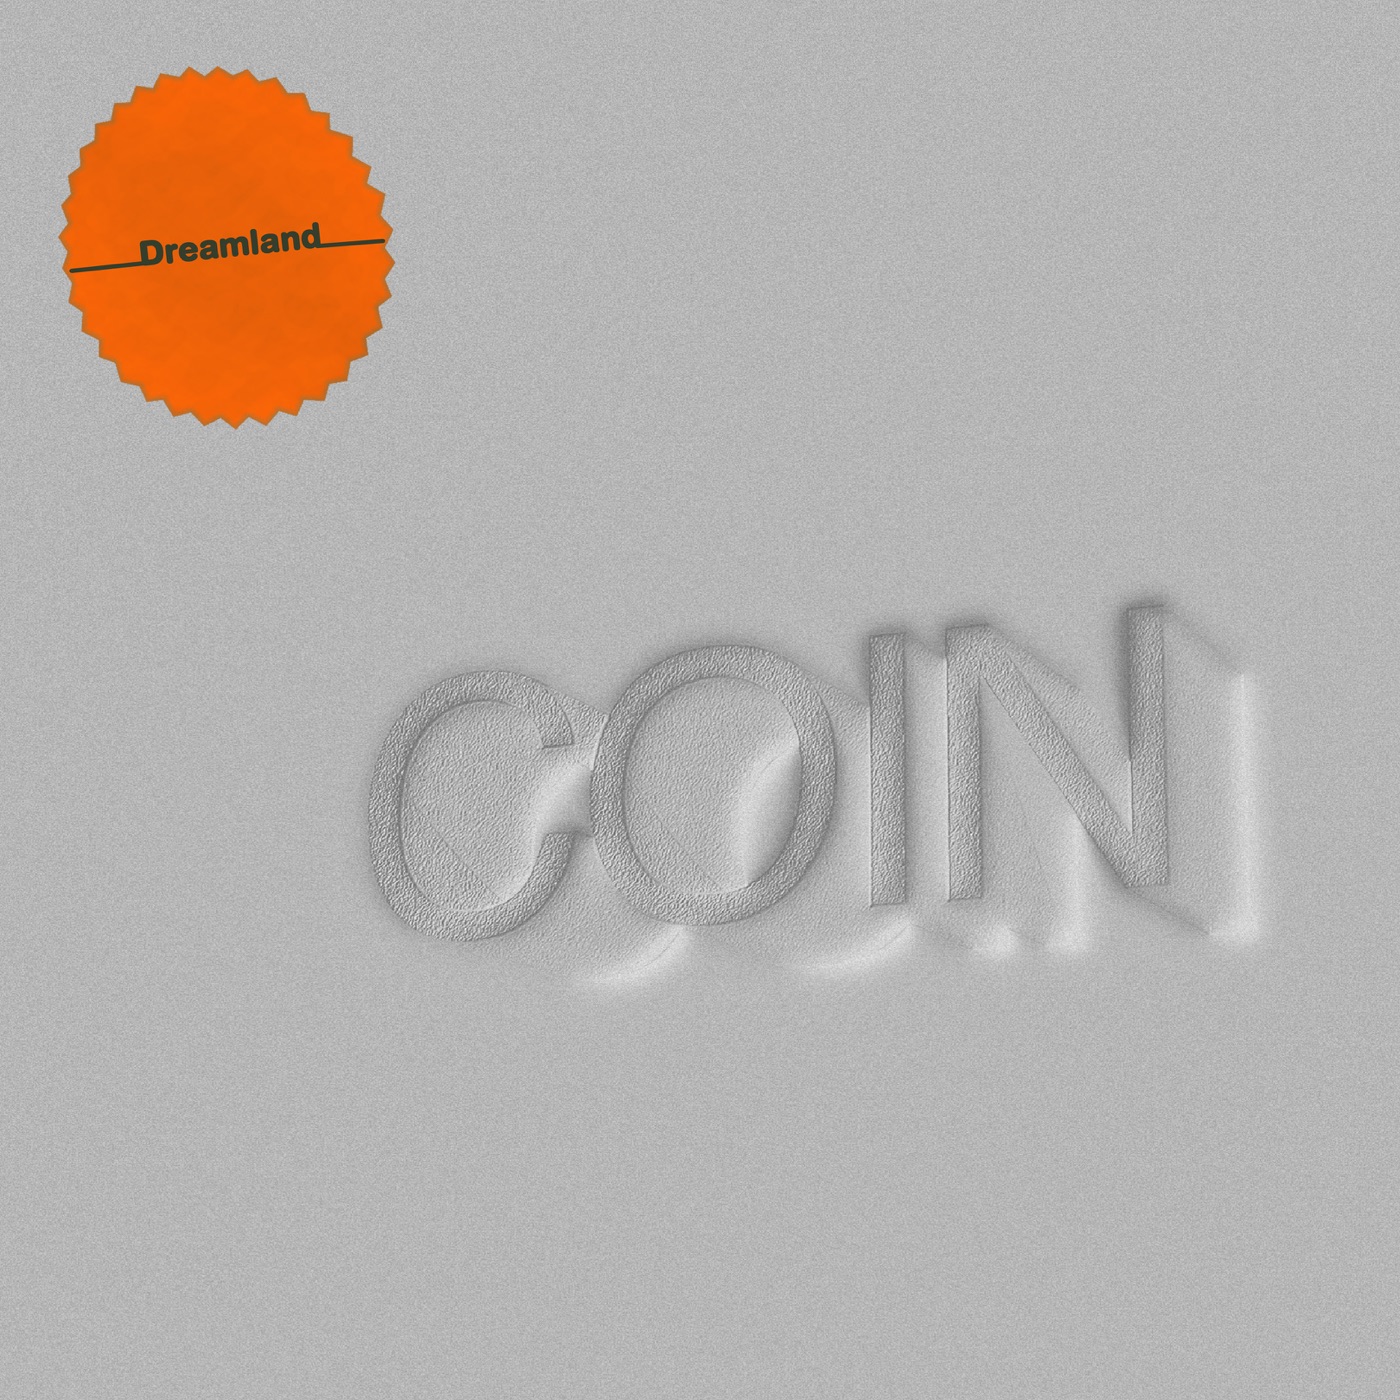 Dreamland by COIN